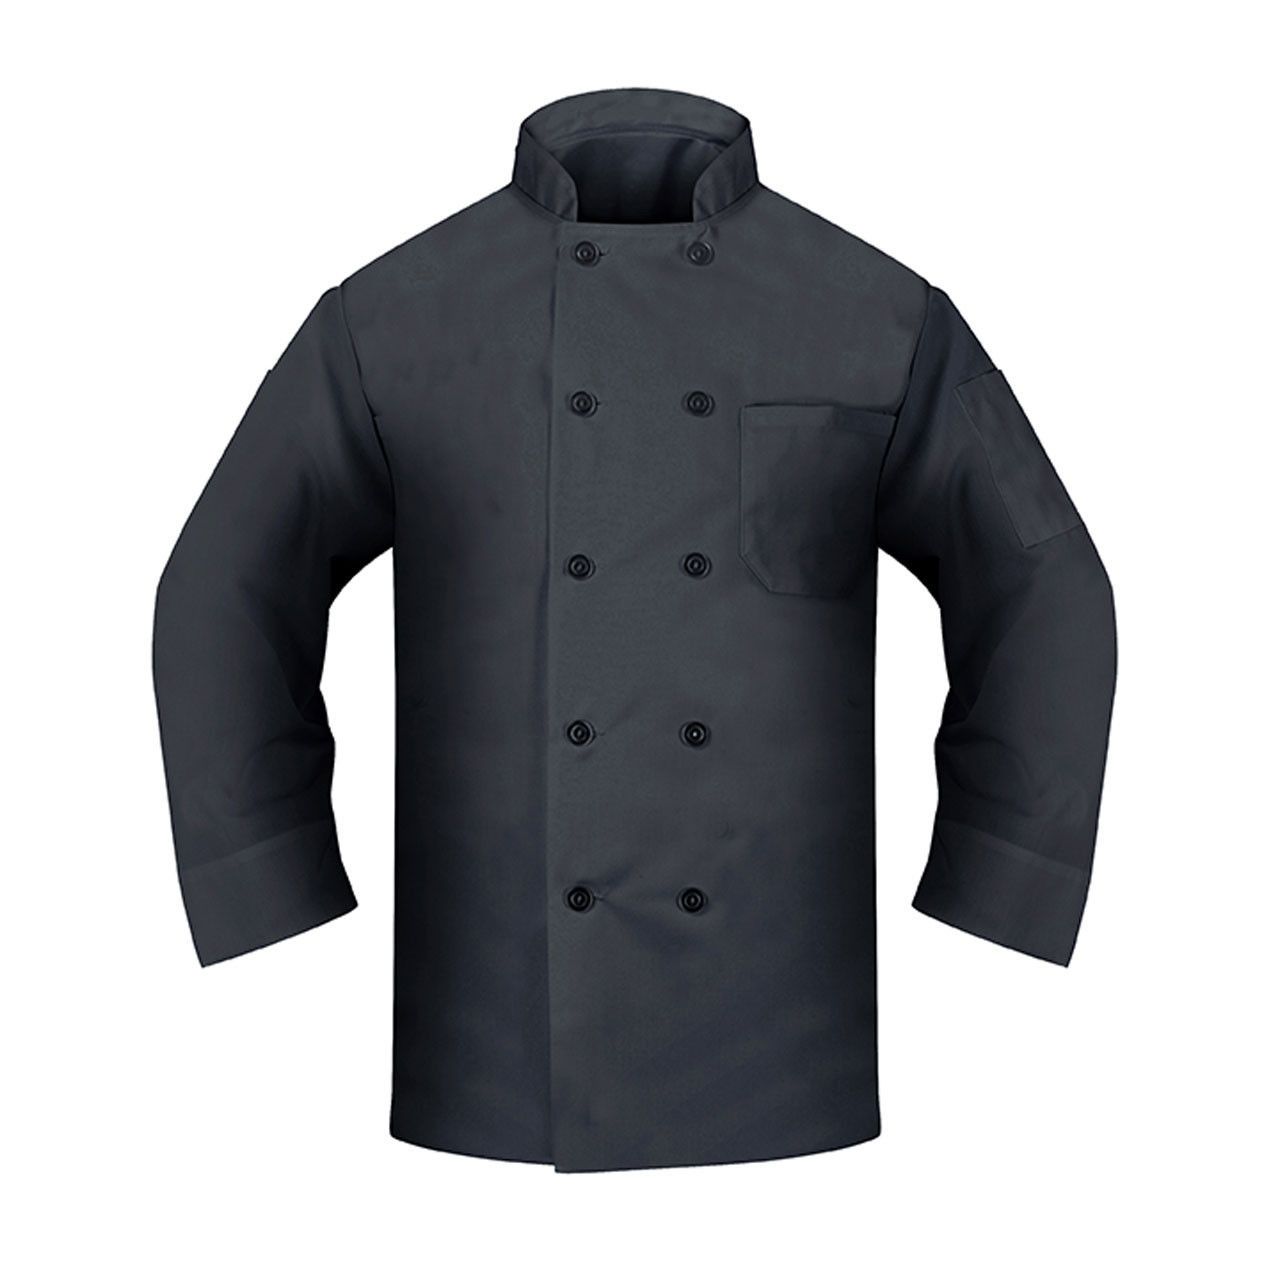 Do the black chef coats have a specific type of cuff?